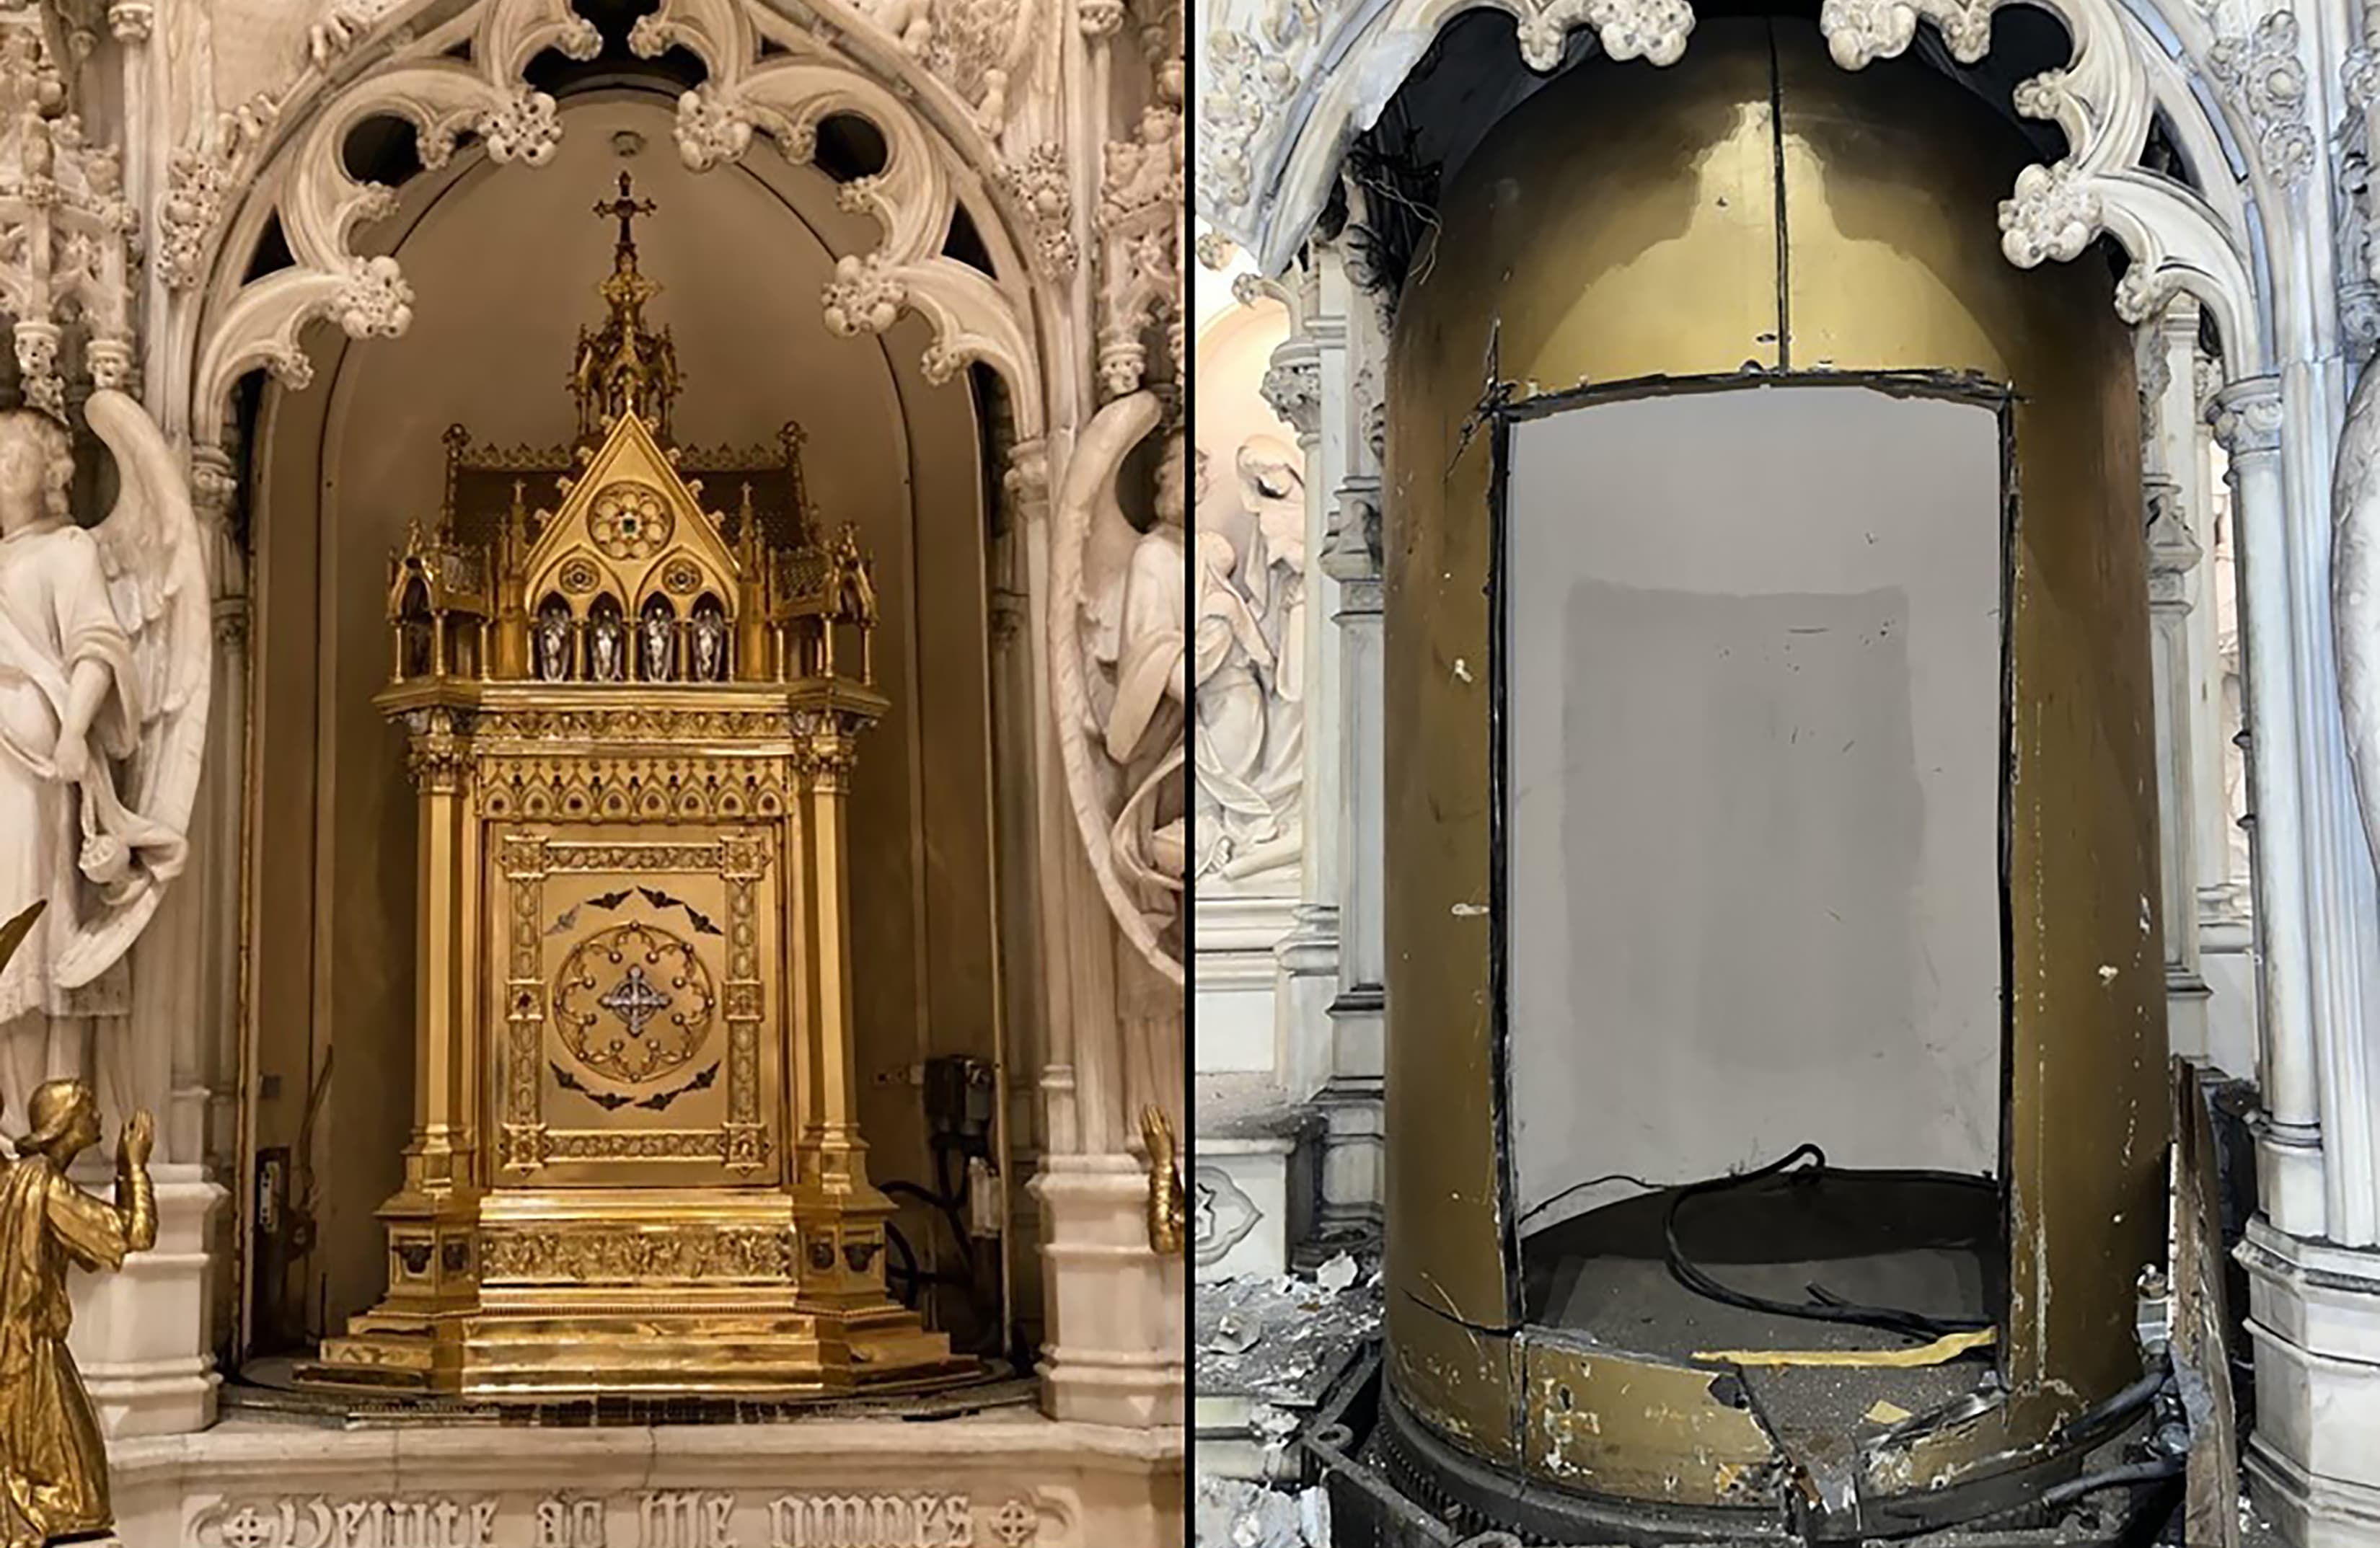 A tabernacle made of 18-karat gold and covered in jewels was stolen from the St. Augustine Cathedral in Brooklyn.